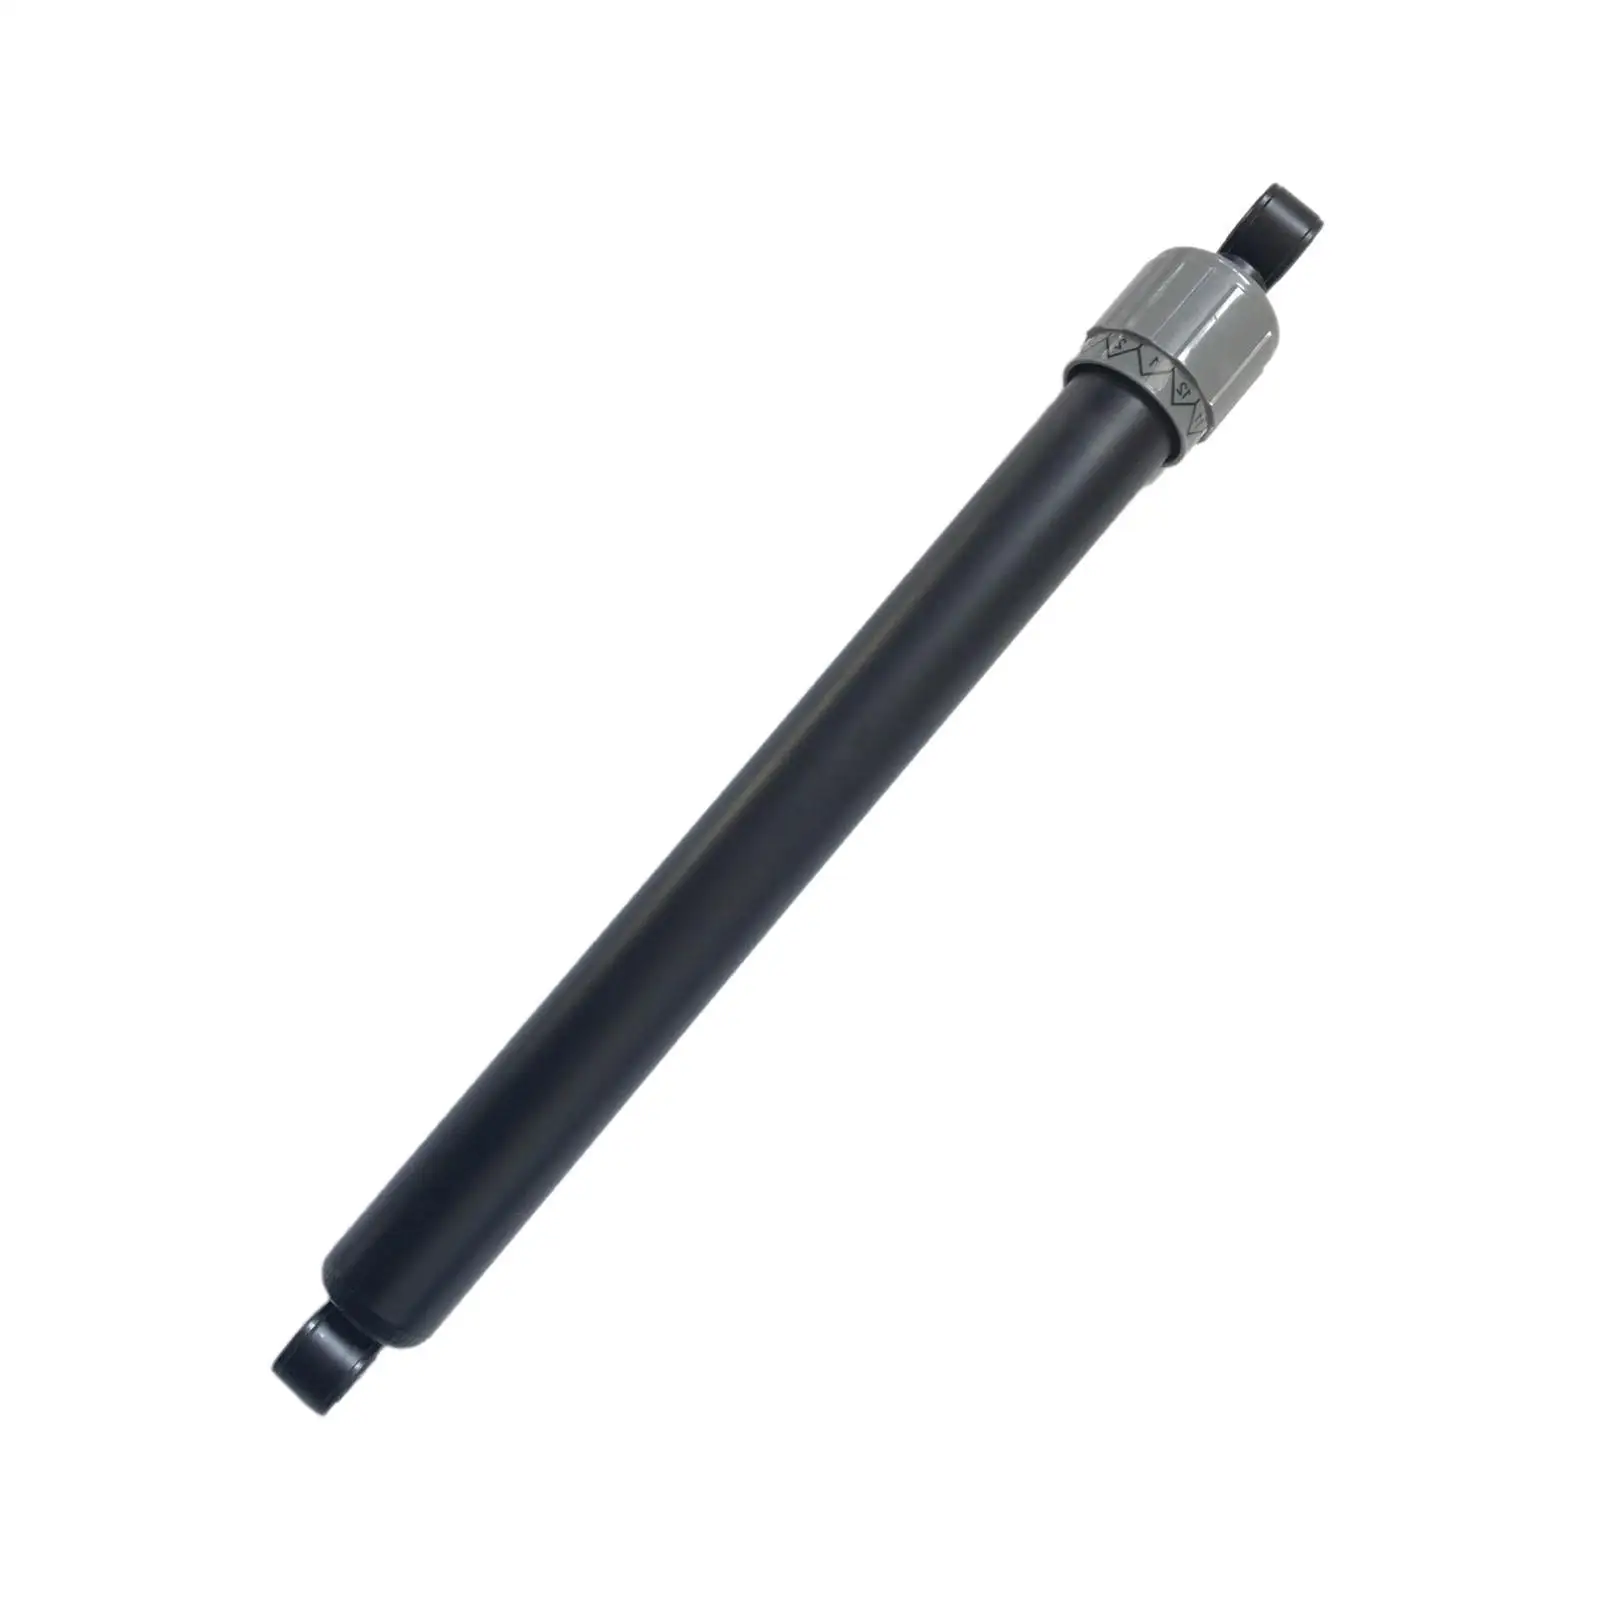 12-Speed Damper Holder Household Modification Parts Antishake Hydraulic Cylinder Accessories 440cm Fitness for Exercise Rowers